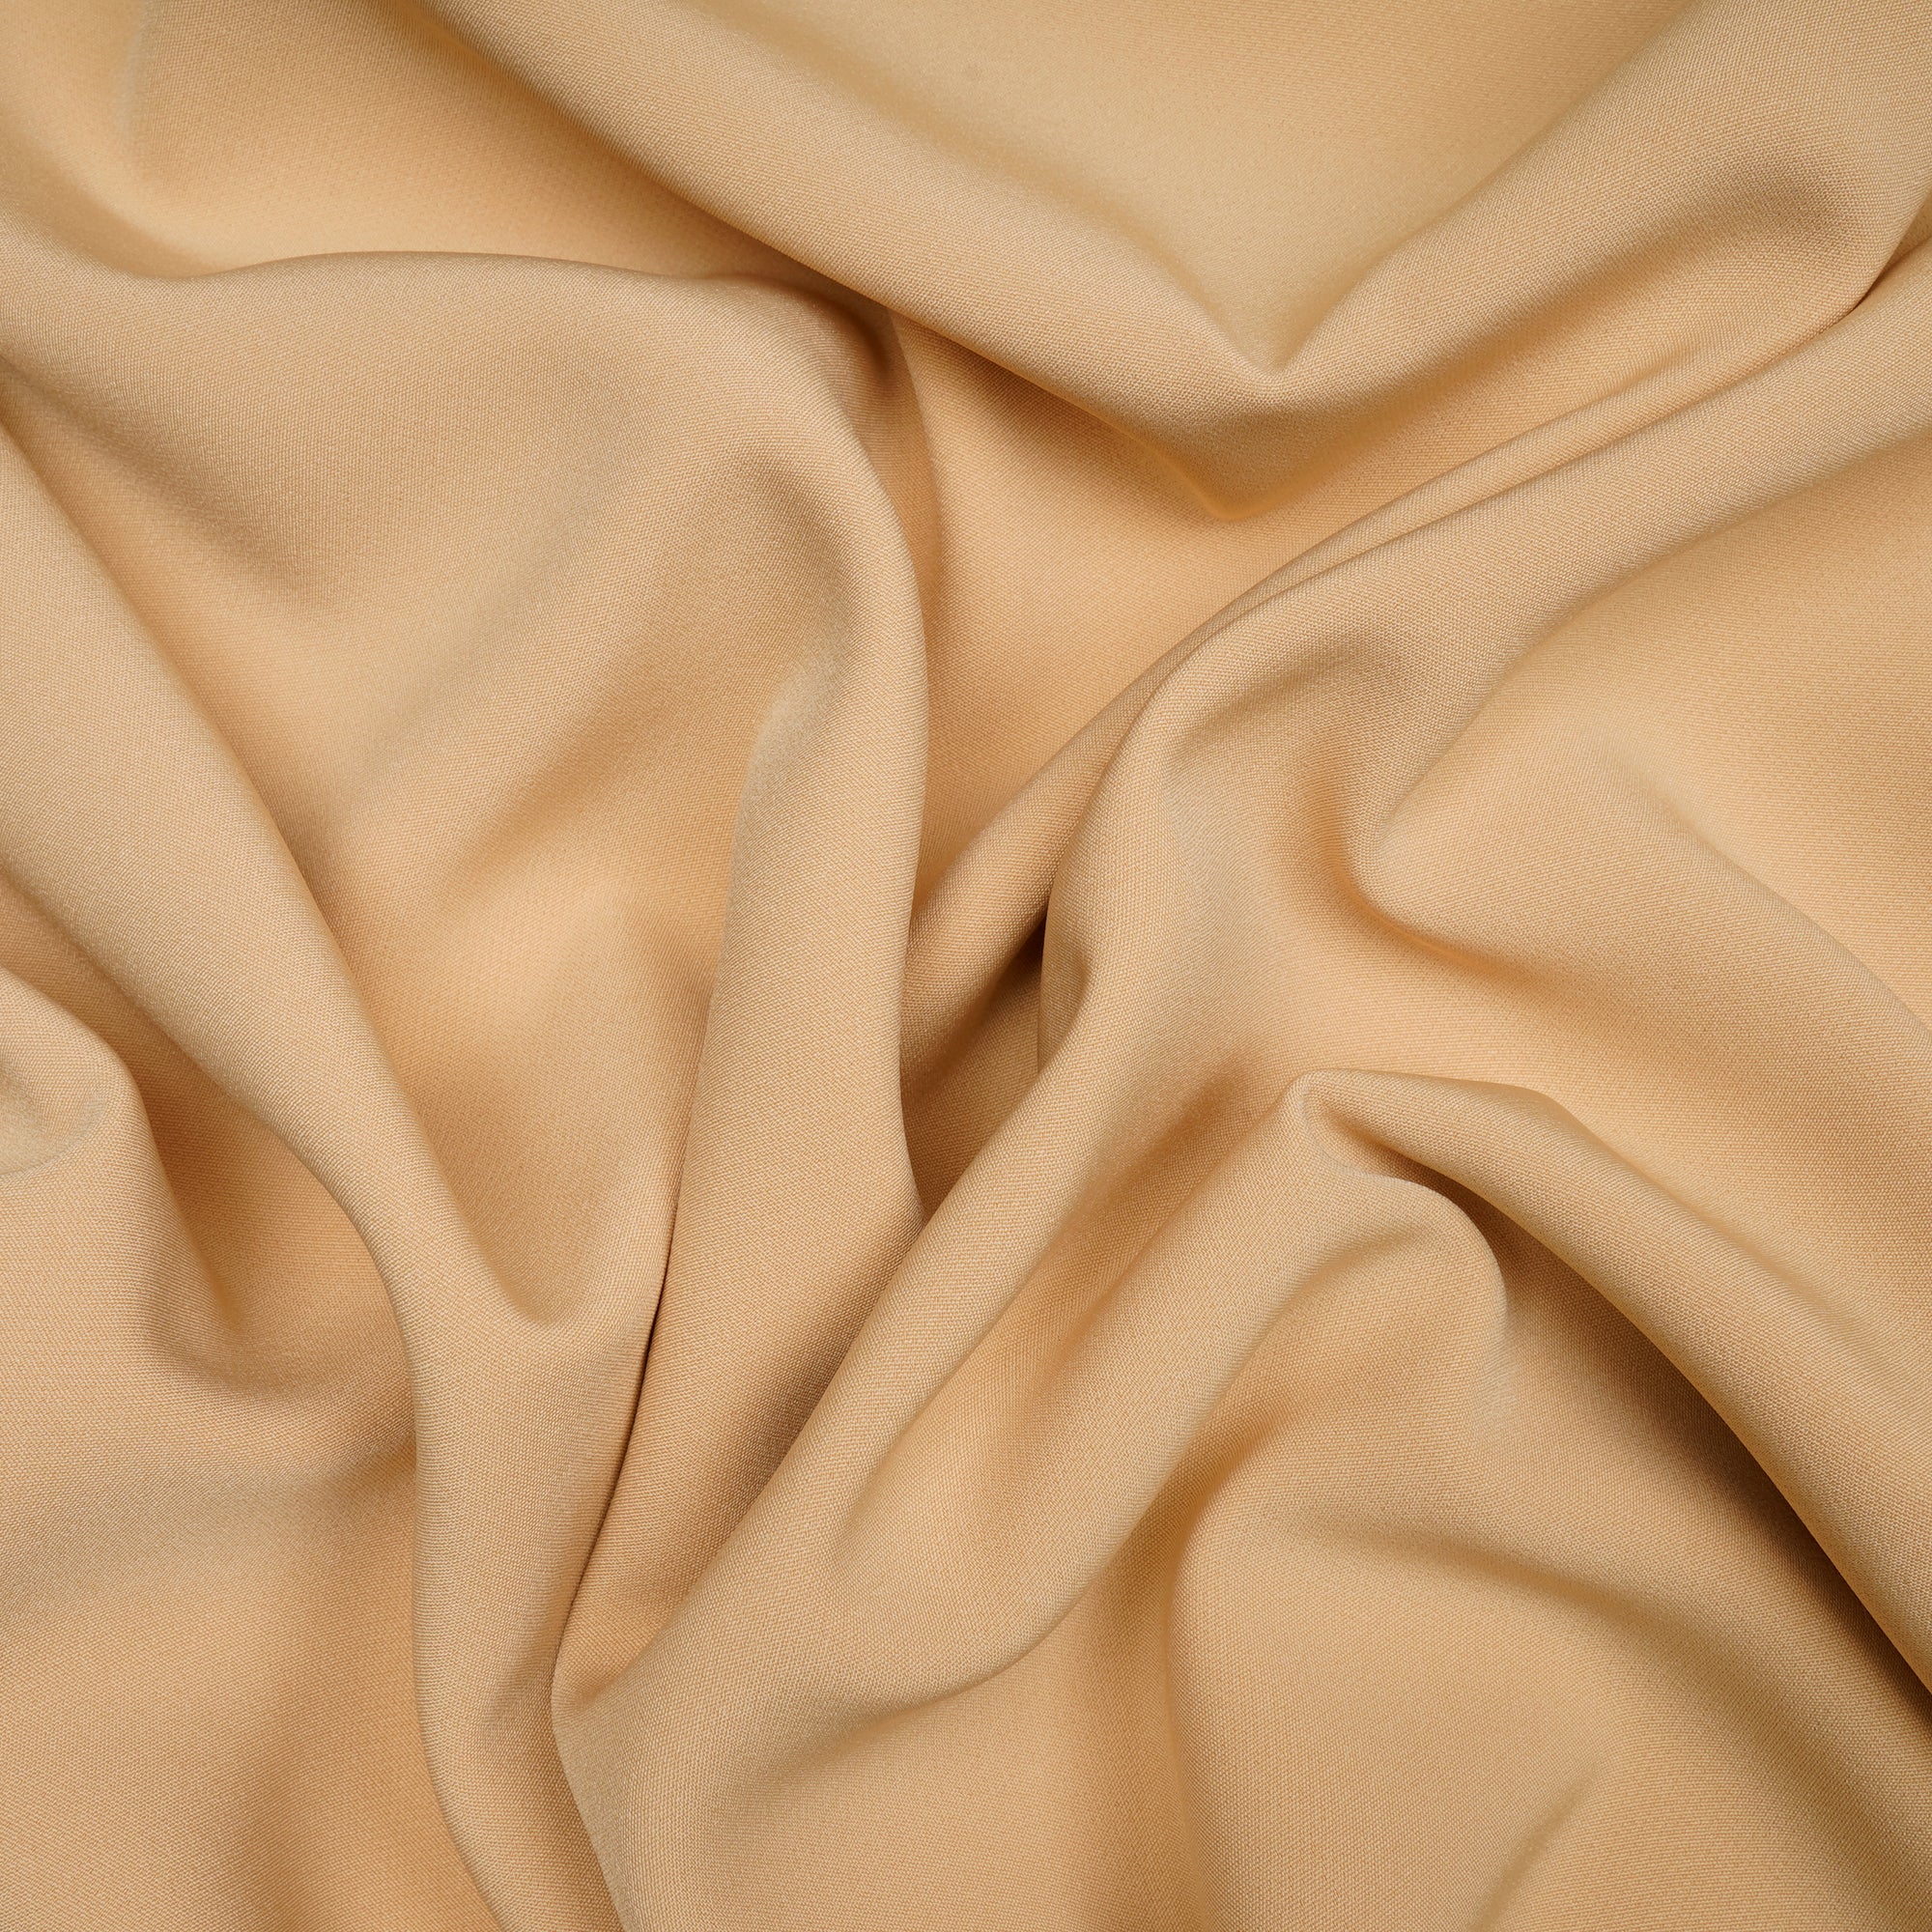 Winter Wheat Solid Dyed Imported Banana Crepe Fabric (60" Width)